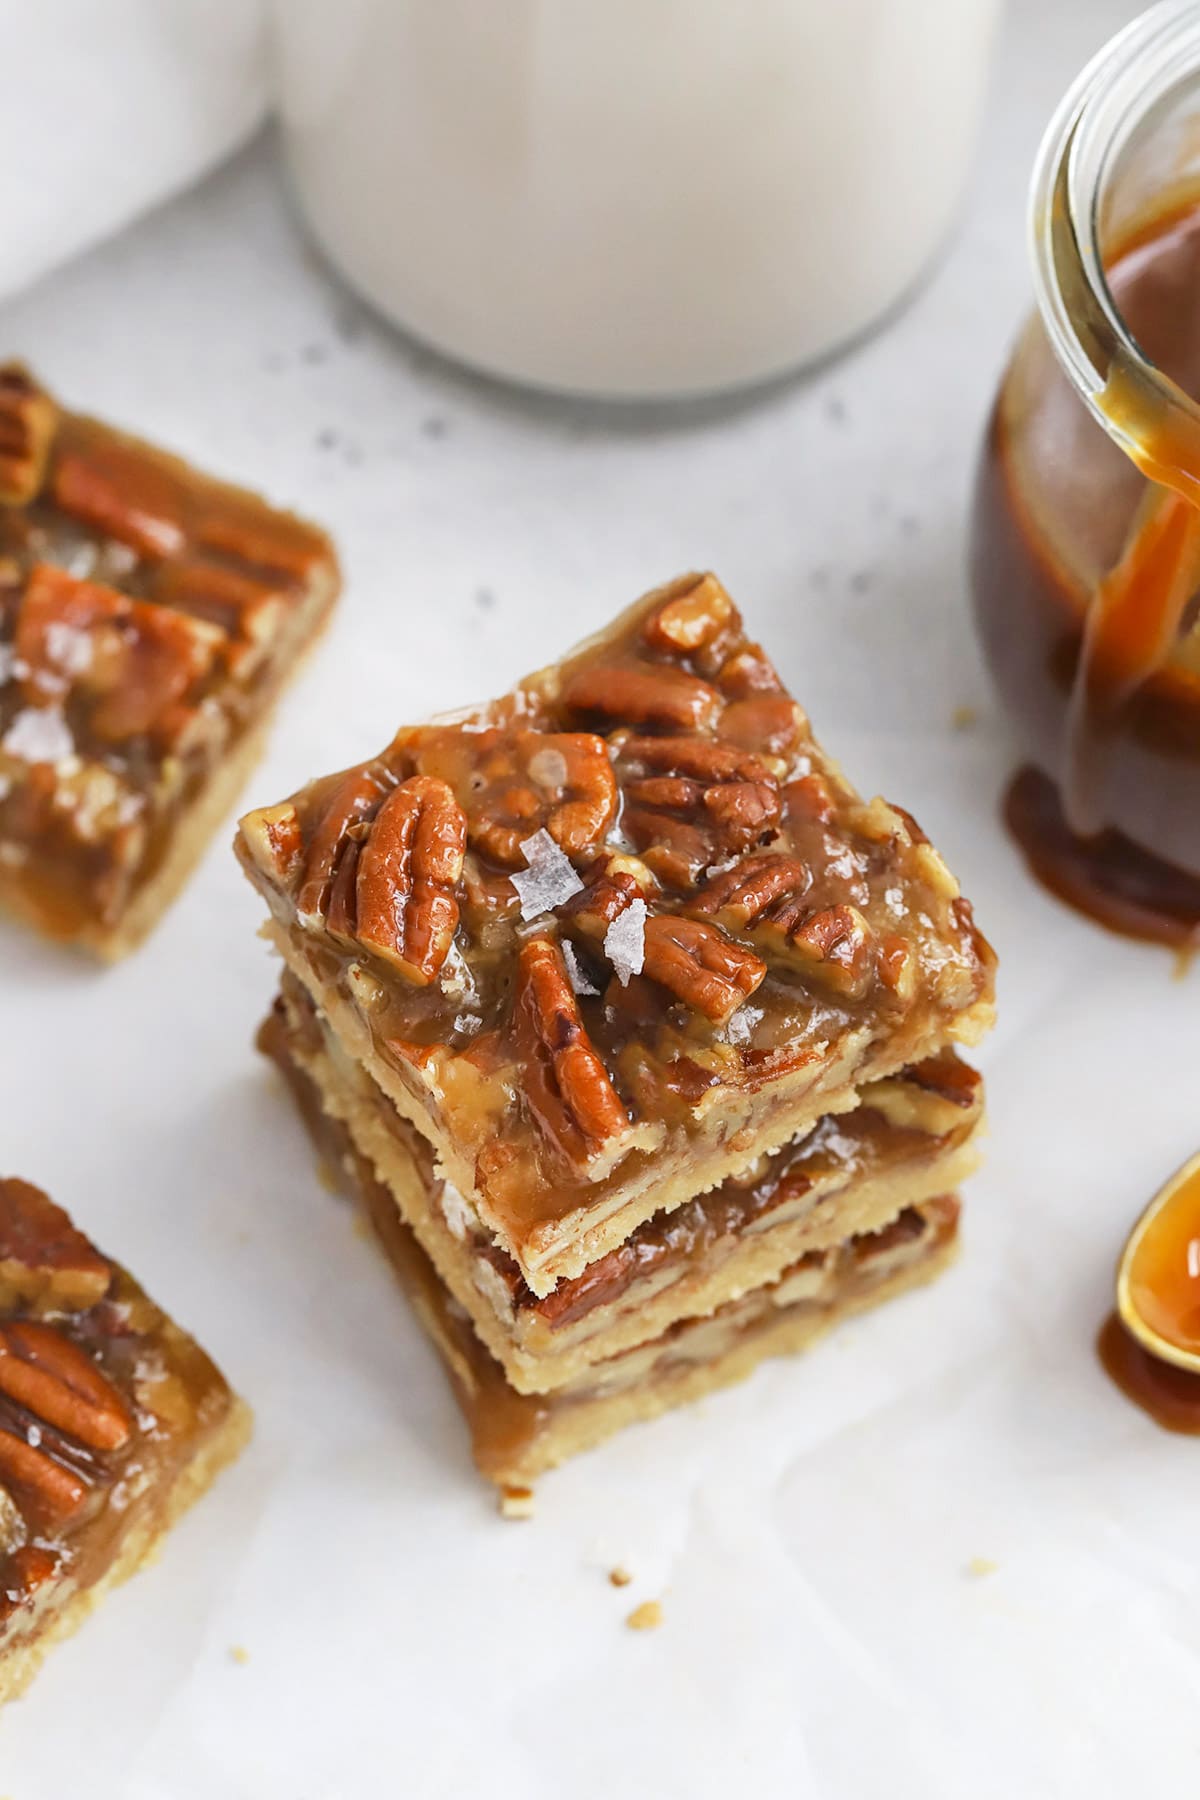 Front view of a stack of three gluten-free salted caramel pecan bars with brown sugar shortbread crust